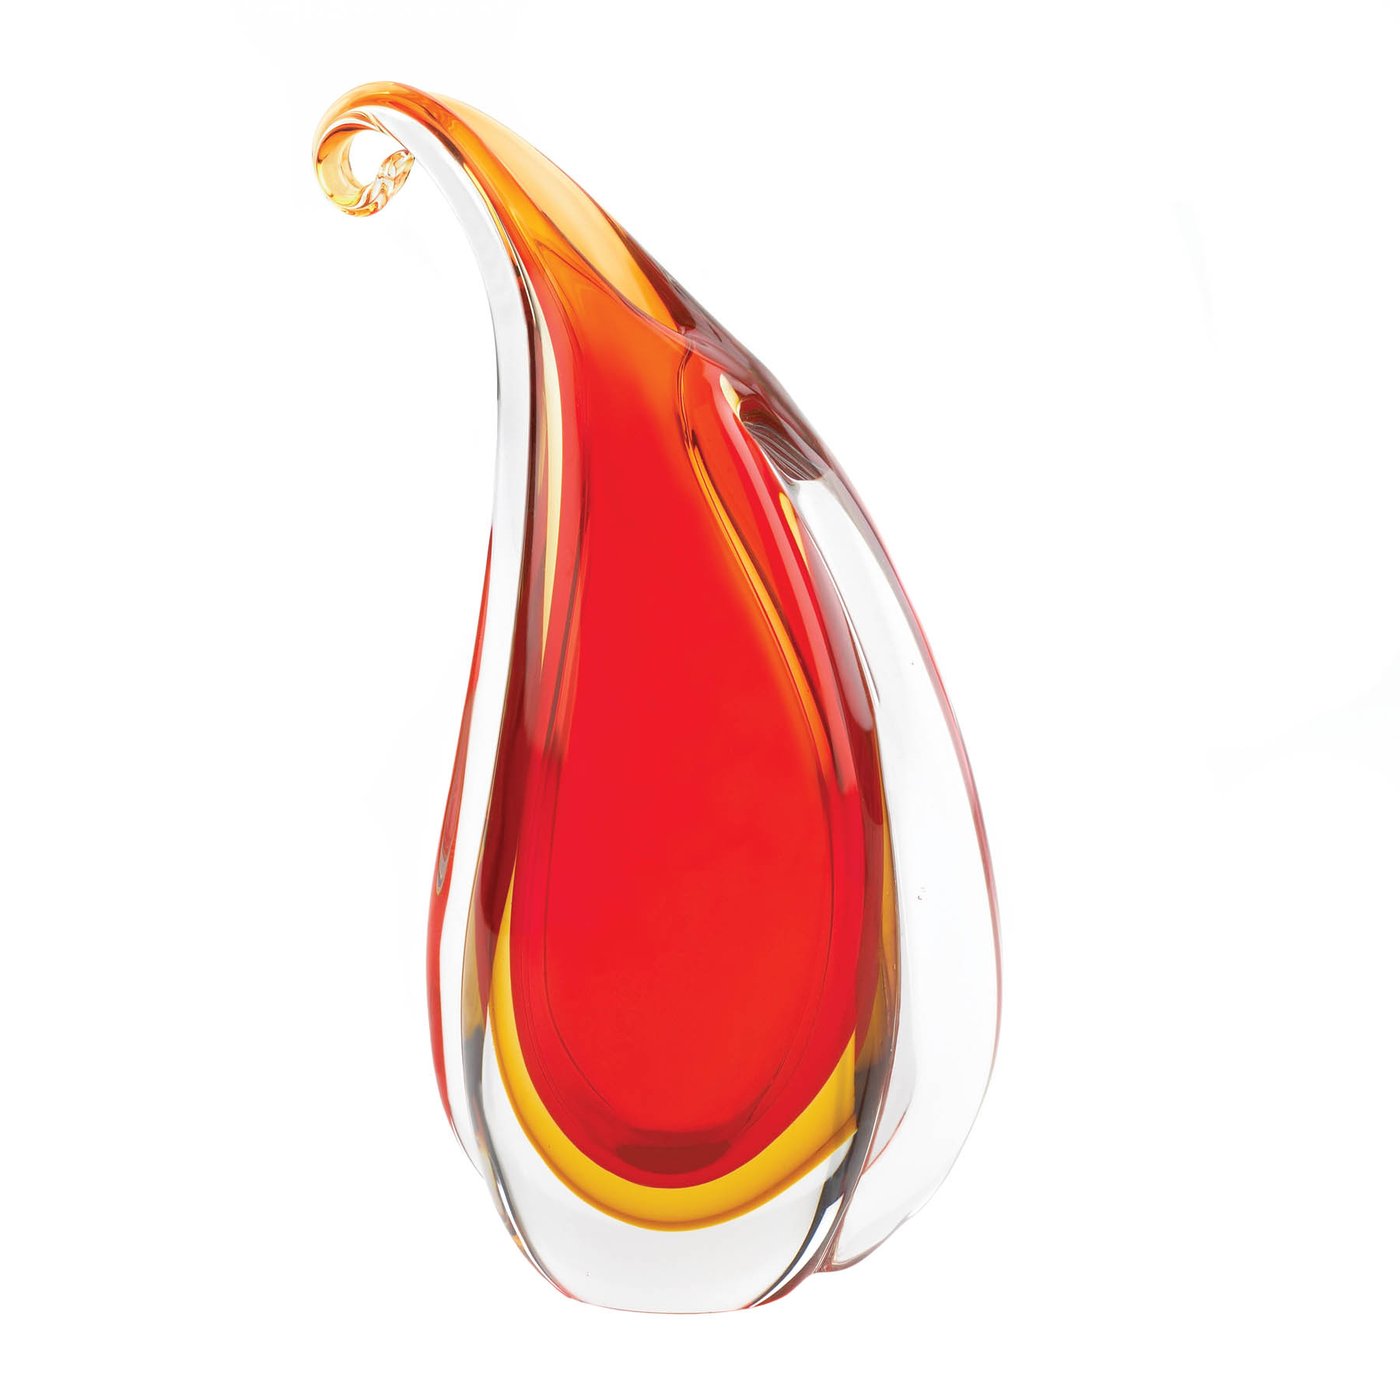 Teardrop Art Glass Vase with Curl - Red Accent Plus